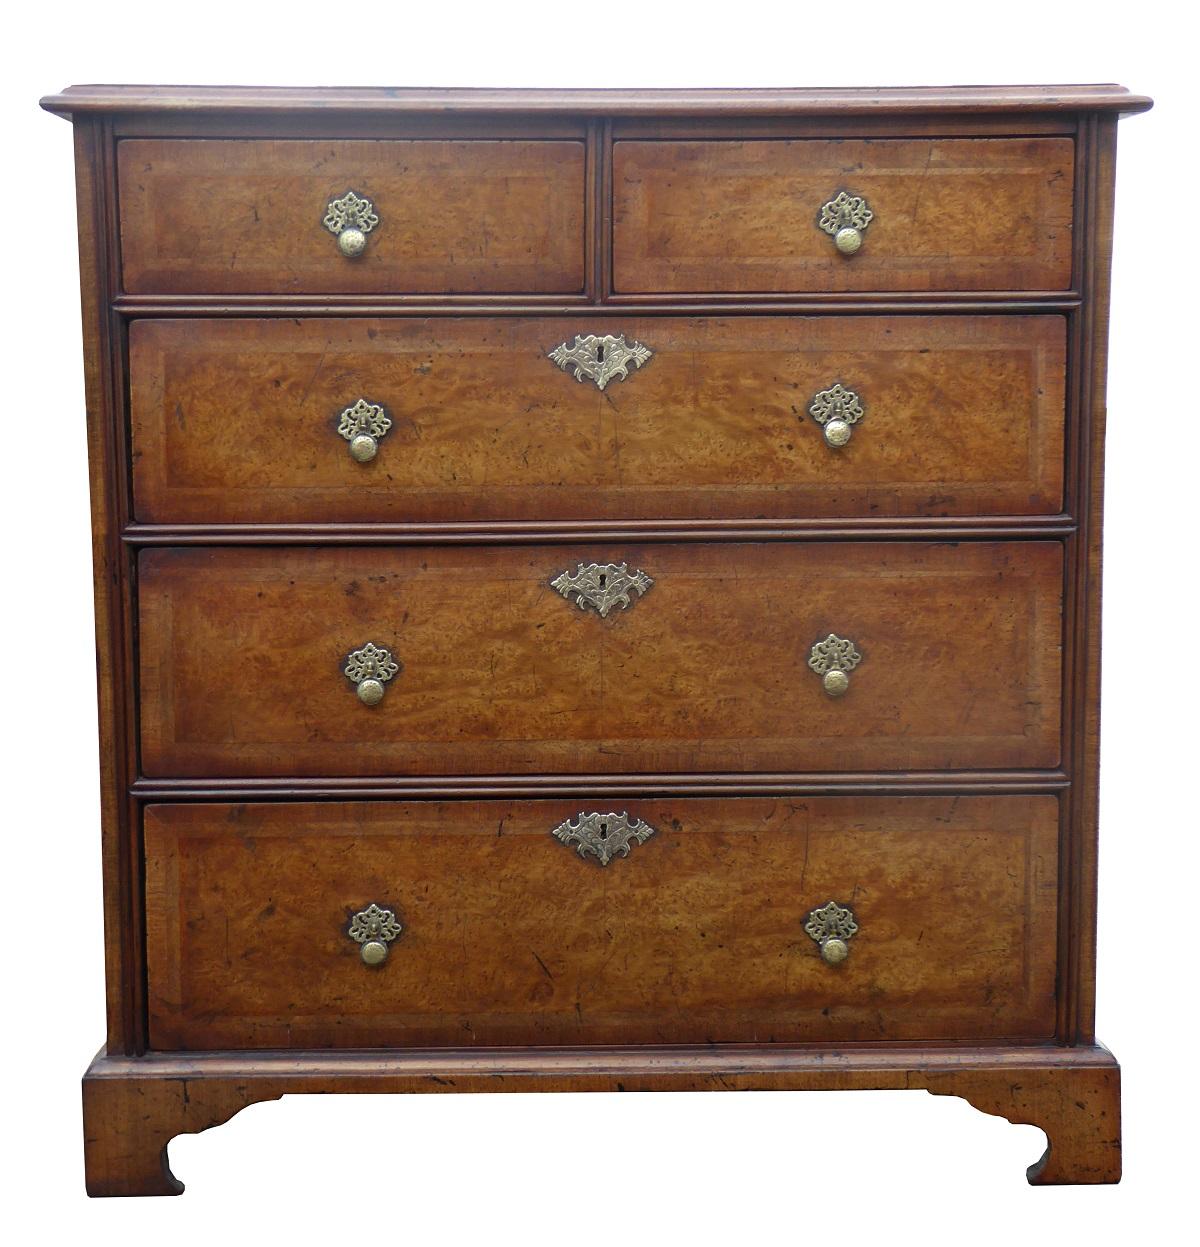 For sale is a good quality George III burr walnut chest of drawers. The chest has an arrangement of five drawers and stands on bracket feet. Each drawer has an ornate brass drop handle. This piece is in excellent condition having been fully